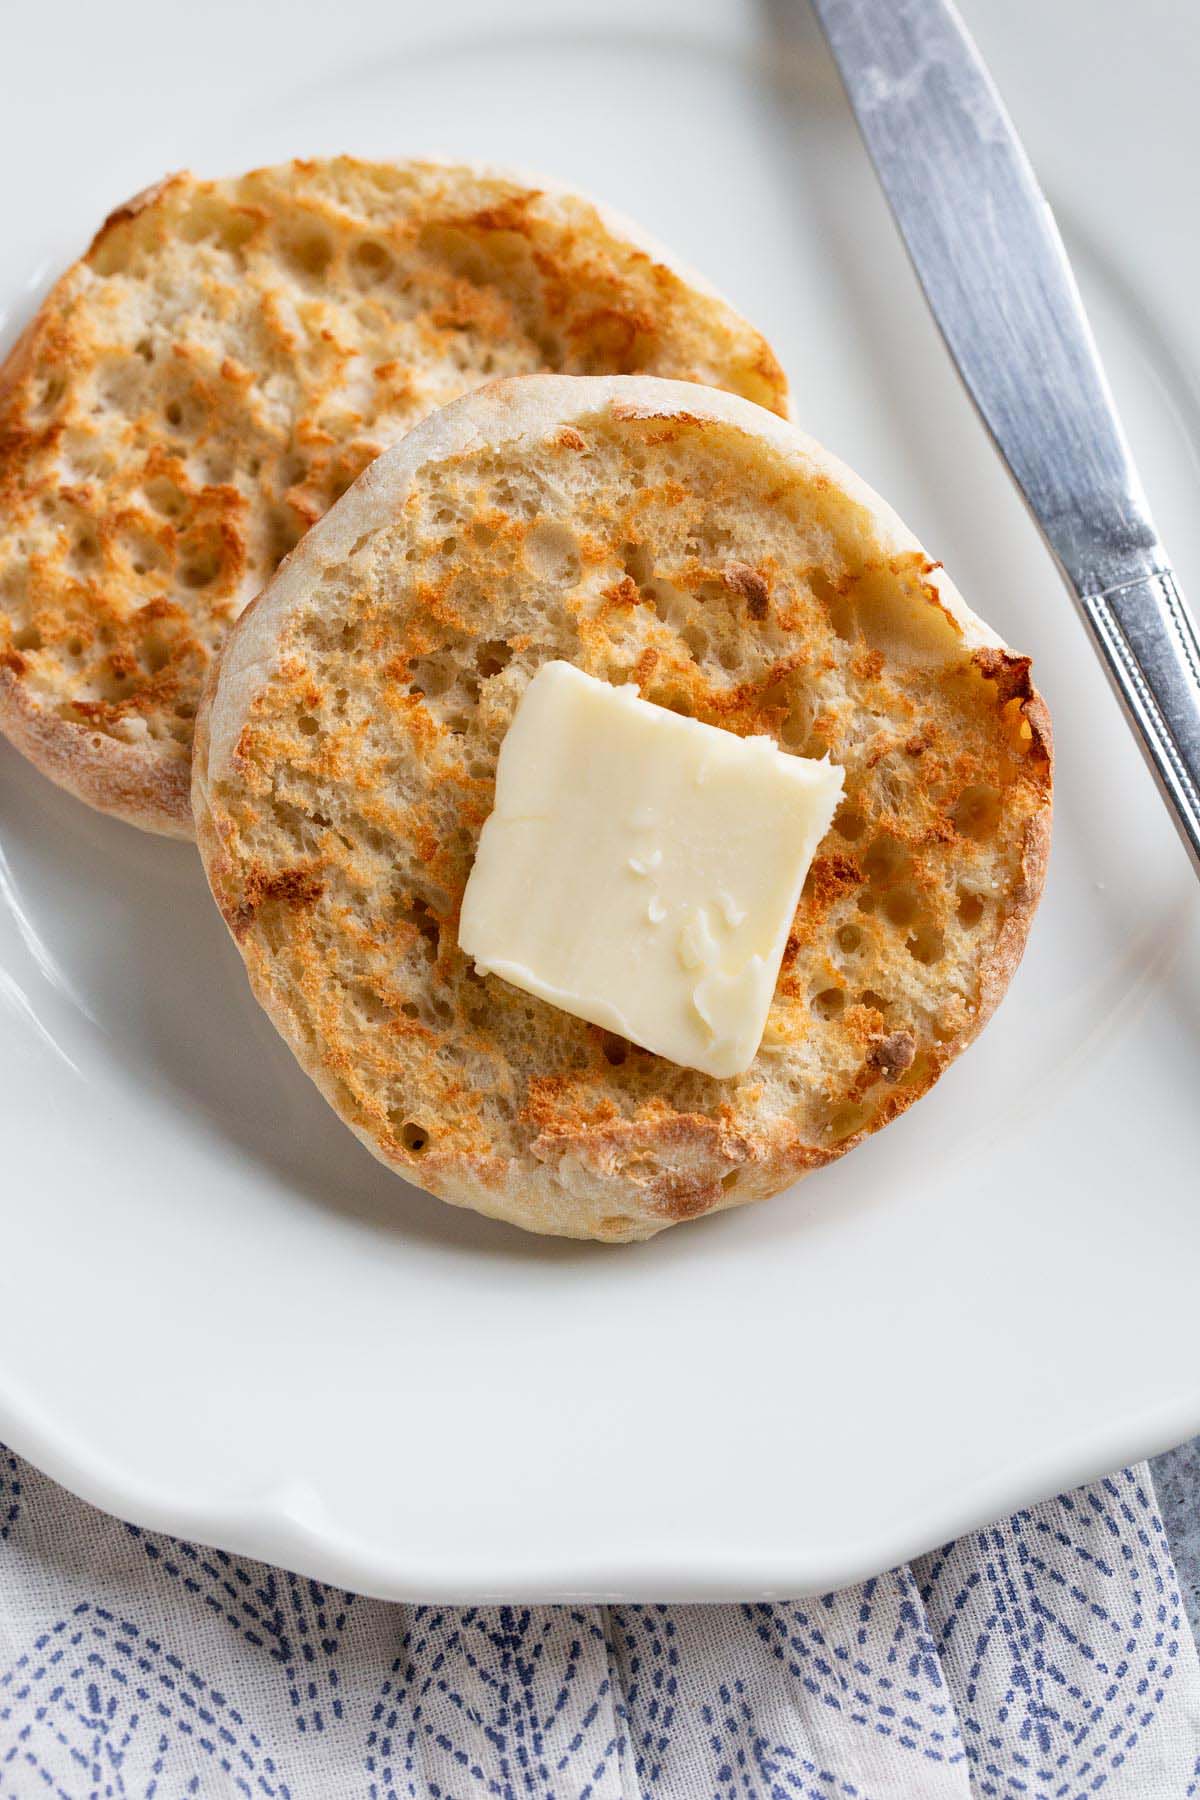 Toasted English muffin with butter.